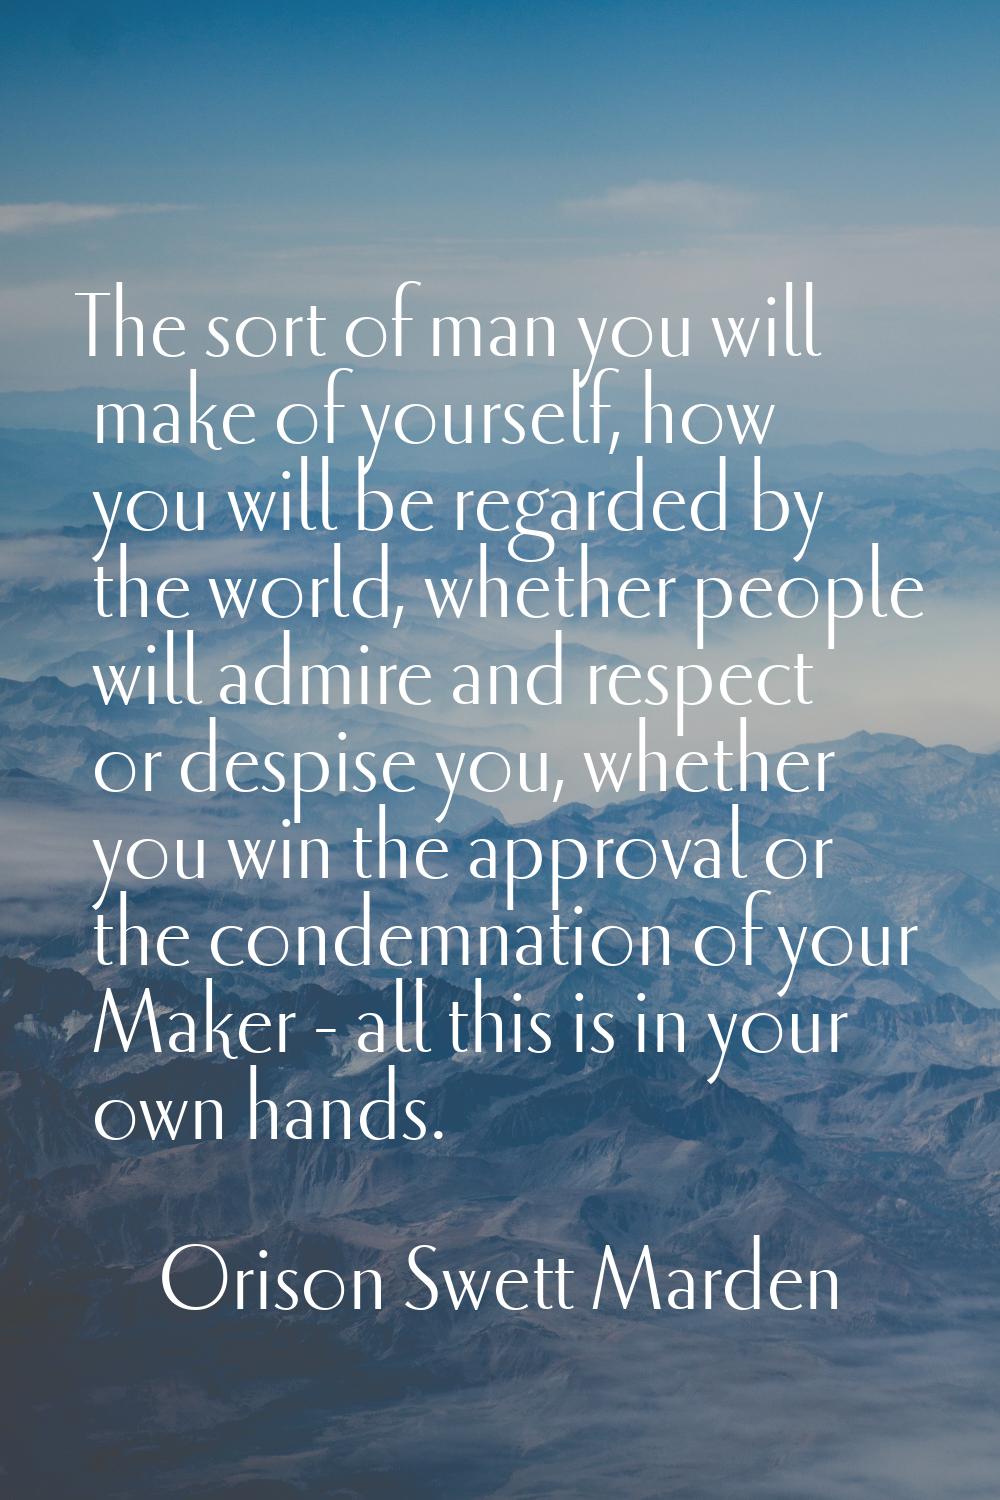 The sort of man you will make of yourself, how you will be regarded by the world, whether people wi